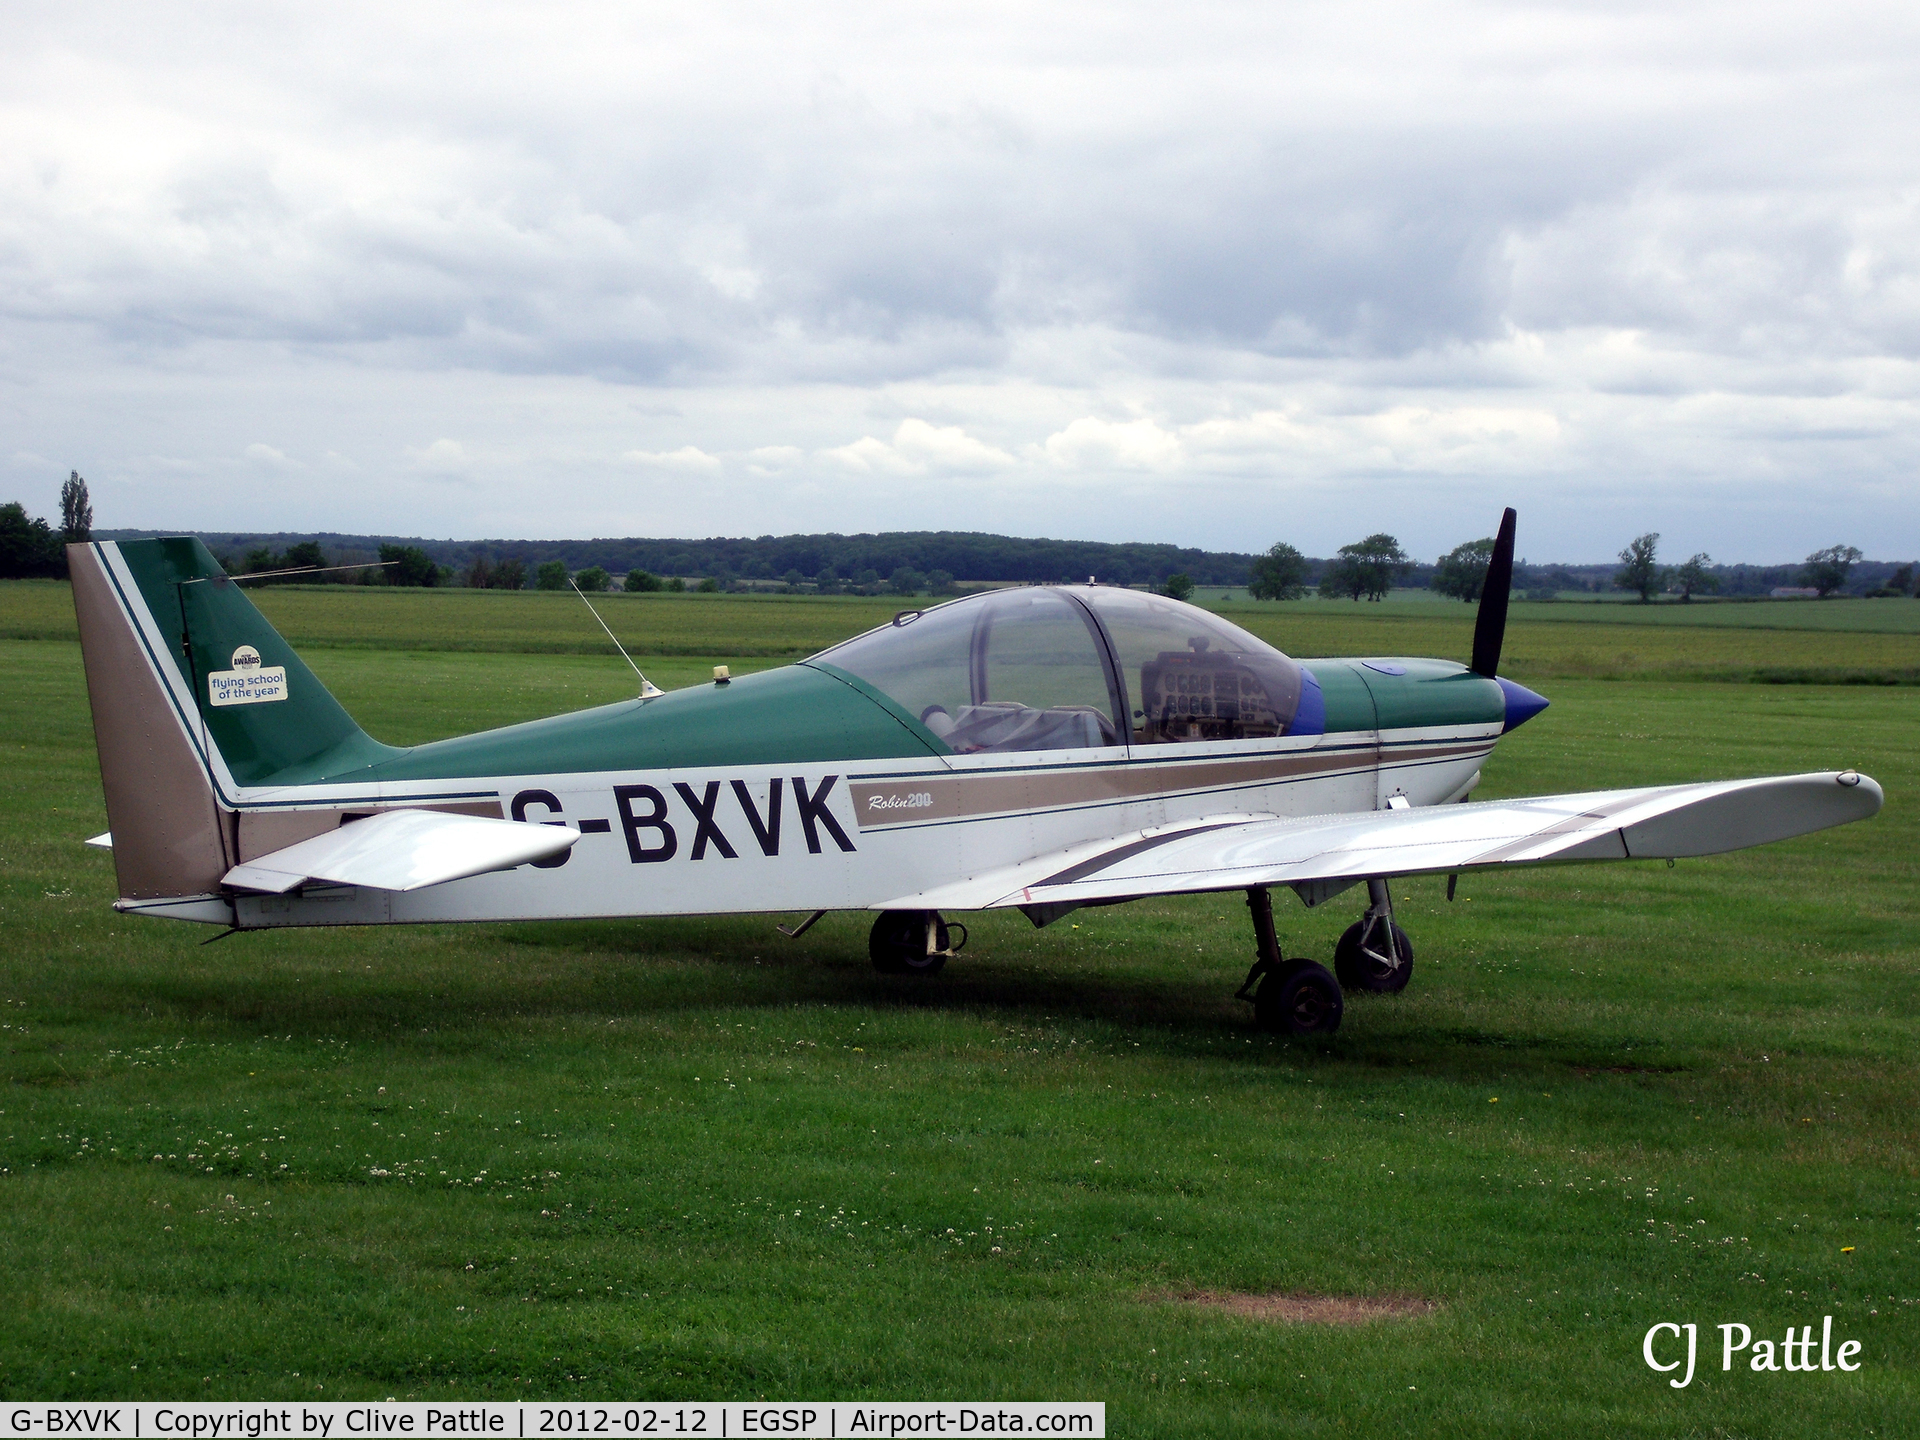 G-BXVK, 1998 Robin HR-200-120B C/N 326, Parked on the grass ready to go at Peterborough/Sibson